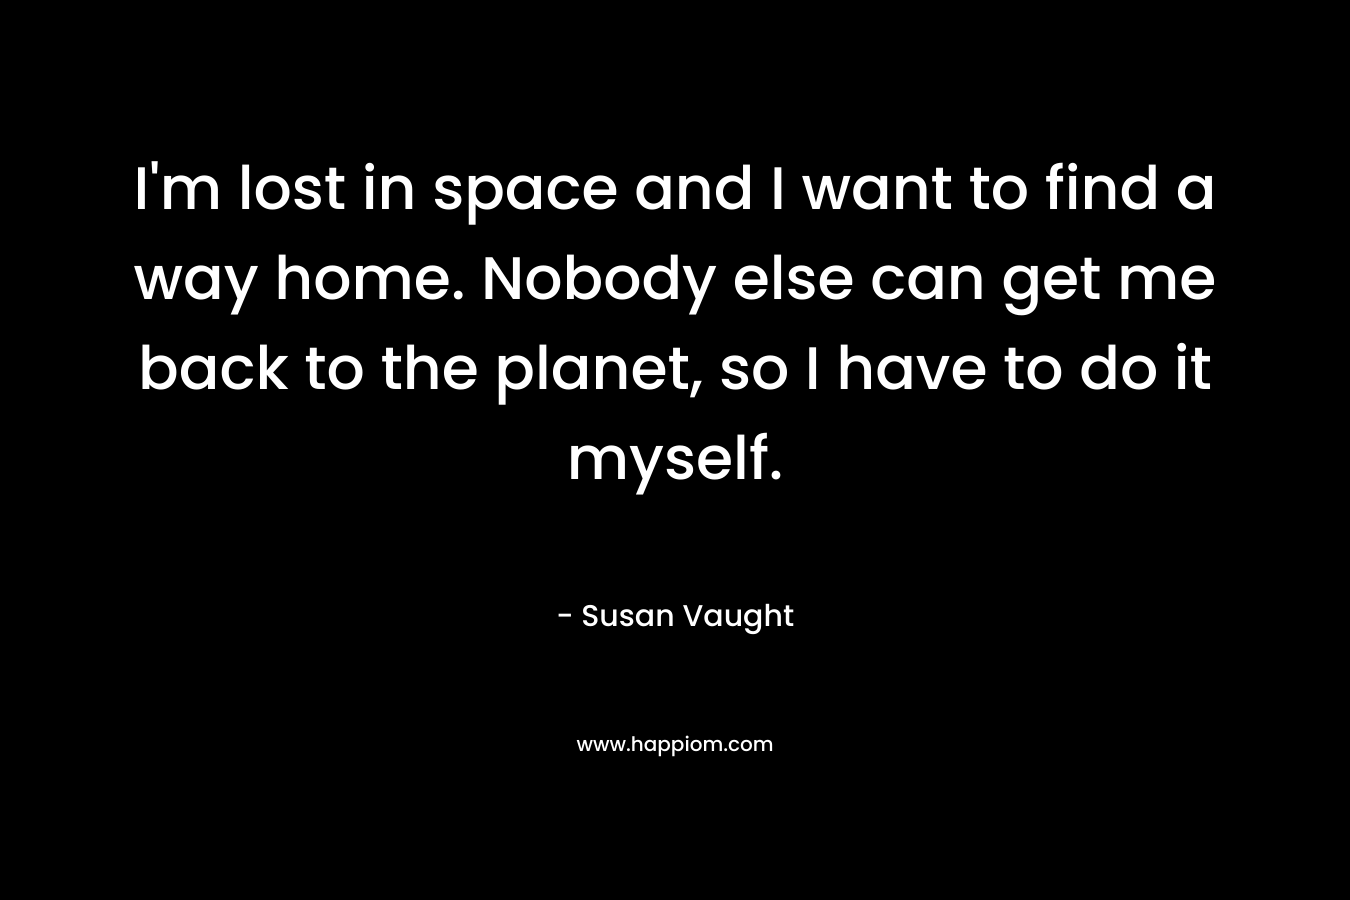 I’m lost in space and I want to find a way home. Nobody else can get me back to the planet, so I have to do it myself. – Susan Vaught